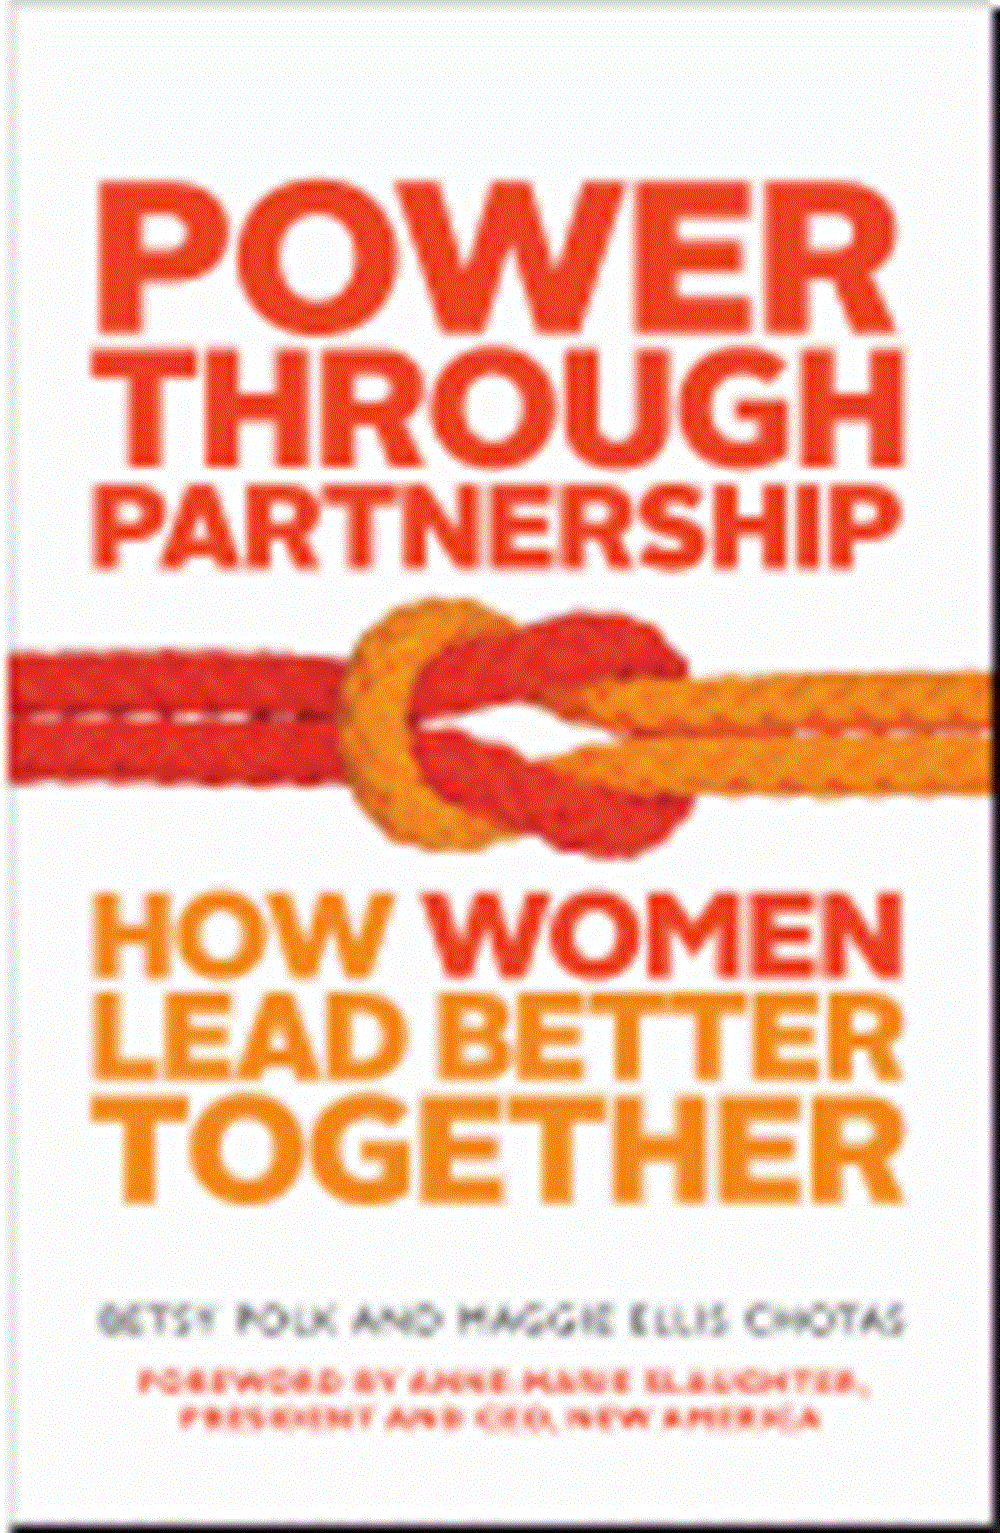 Power Through Partnership How Women Lead Better Together